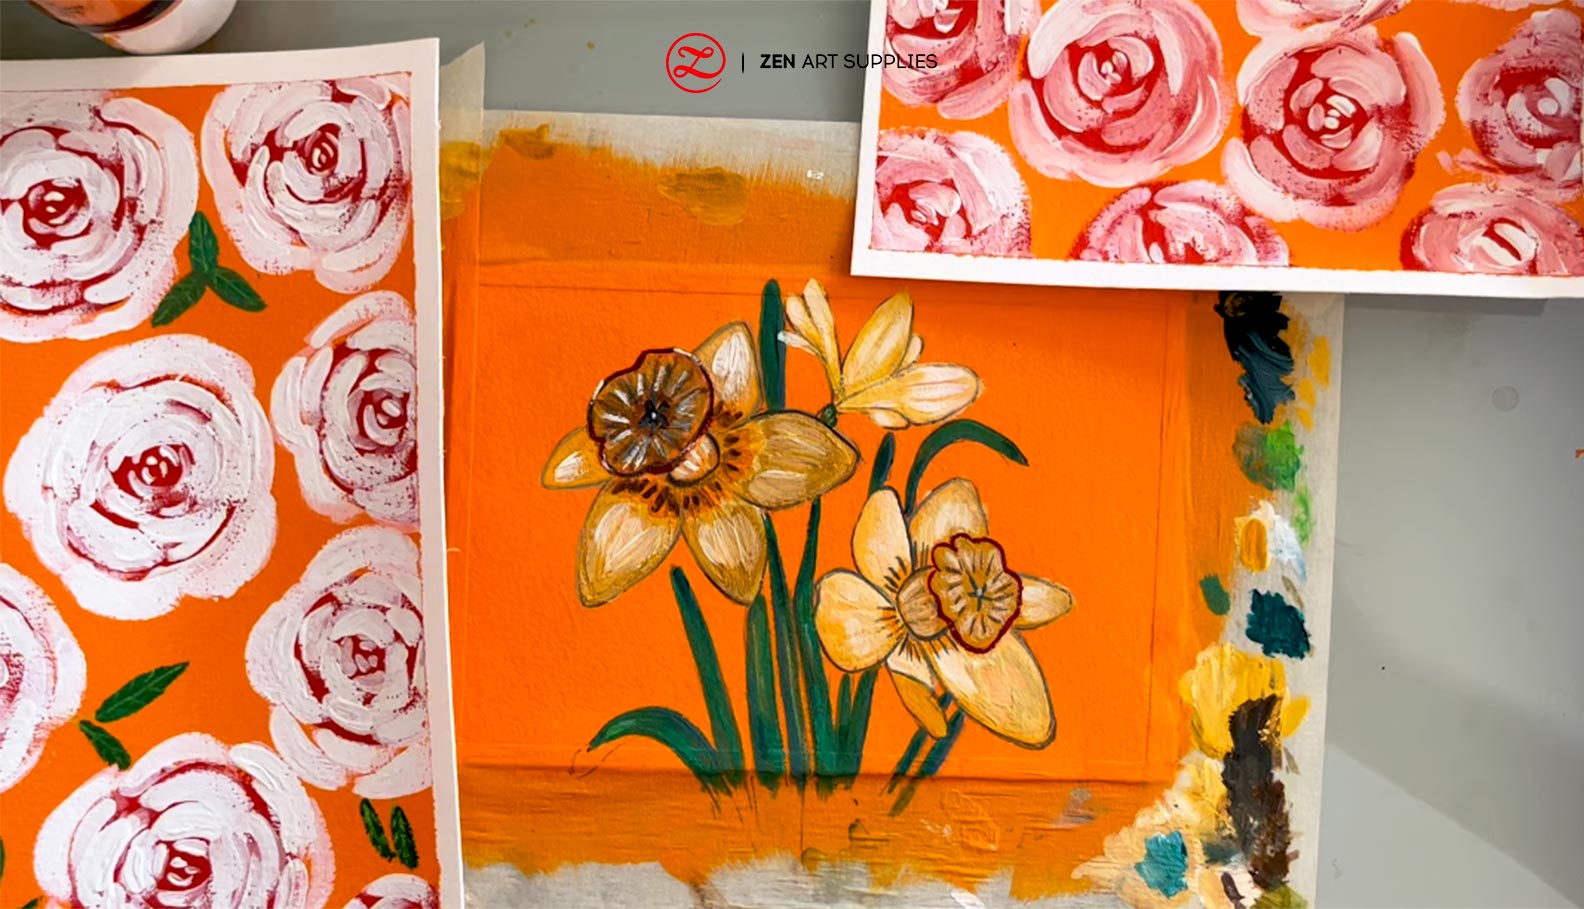 Final gouache roses and narcissus gouache flowers.